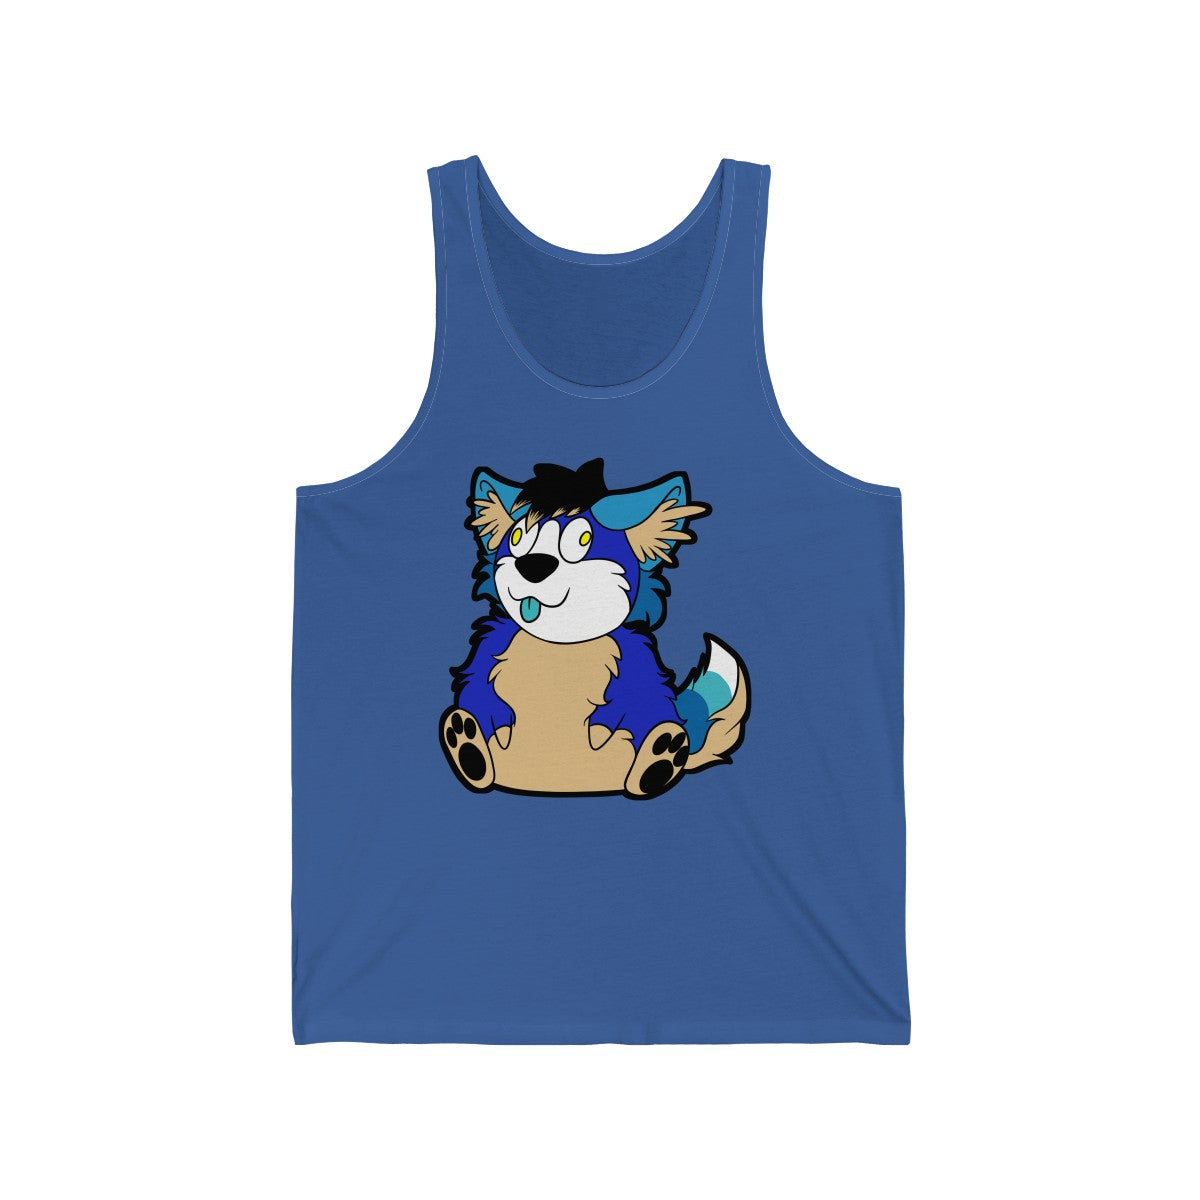 Thicc Boi No Text - Tank Top Tank Top AFLT-Hund The Hound Royal Blue XS 